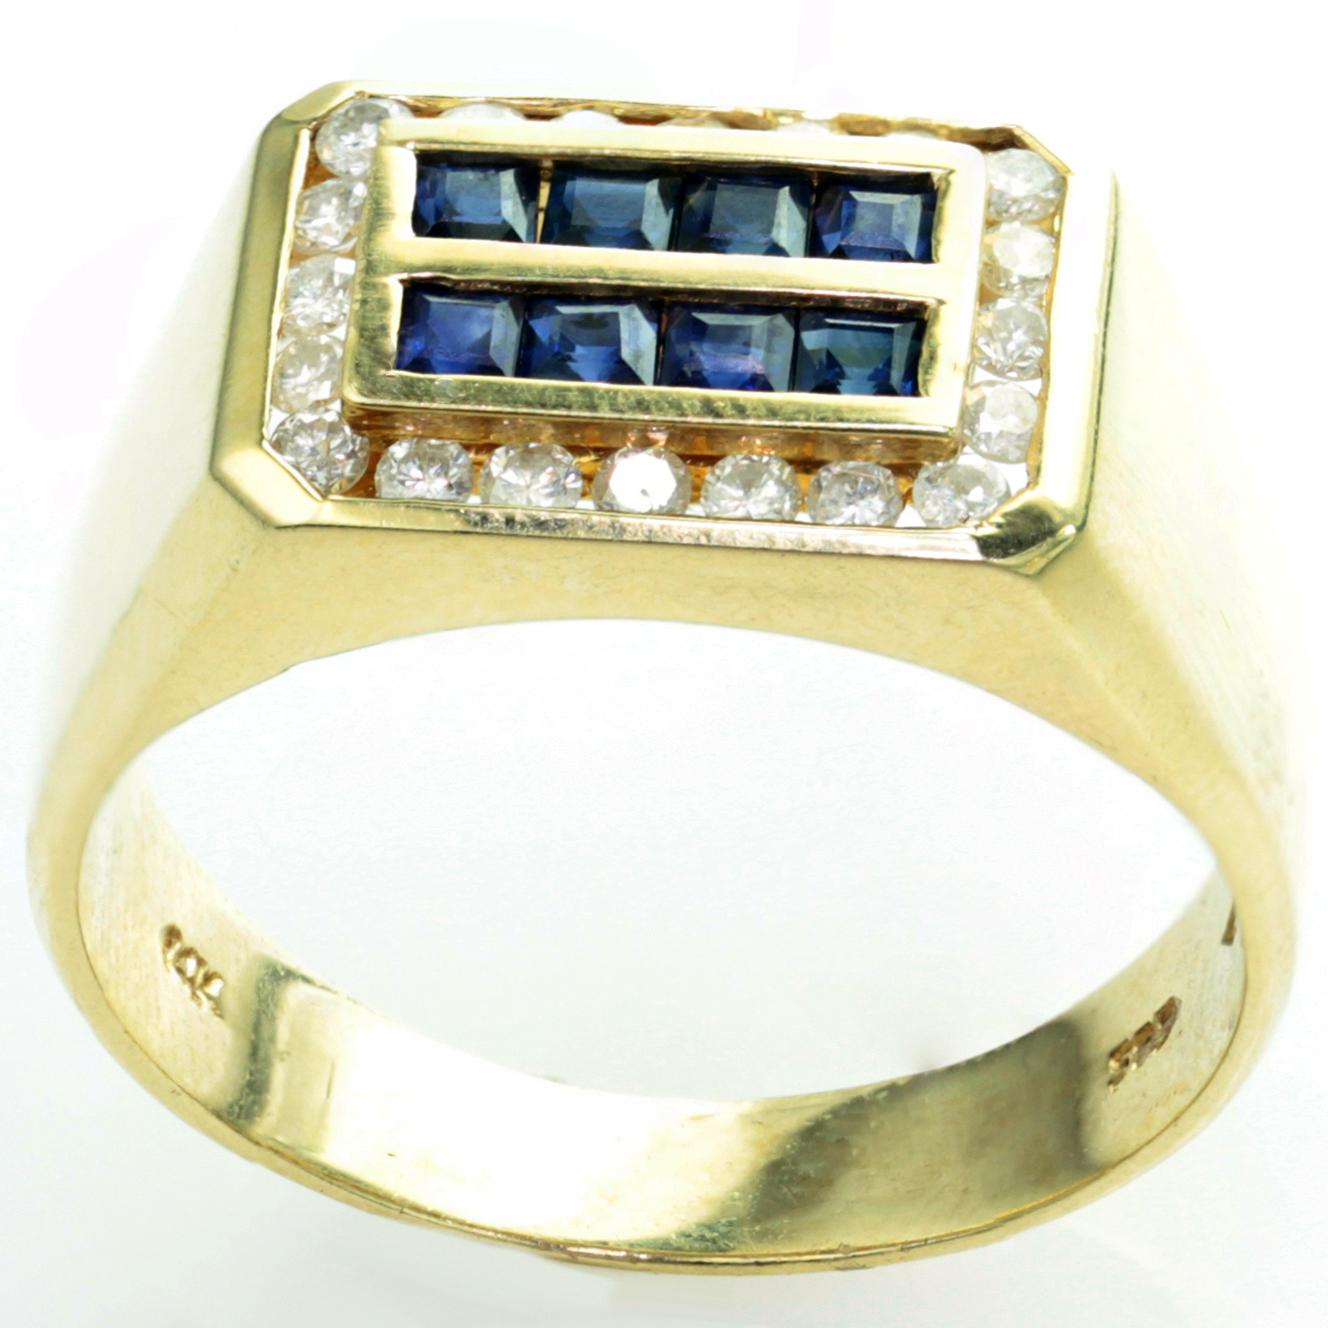 This elegant men's ring is made in 14k yellow gold and features 8 square channel-set sapphires surrounded by sparkling round diamonds. Circa 1980s. Measurements: 0.38